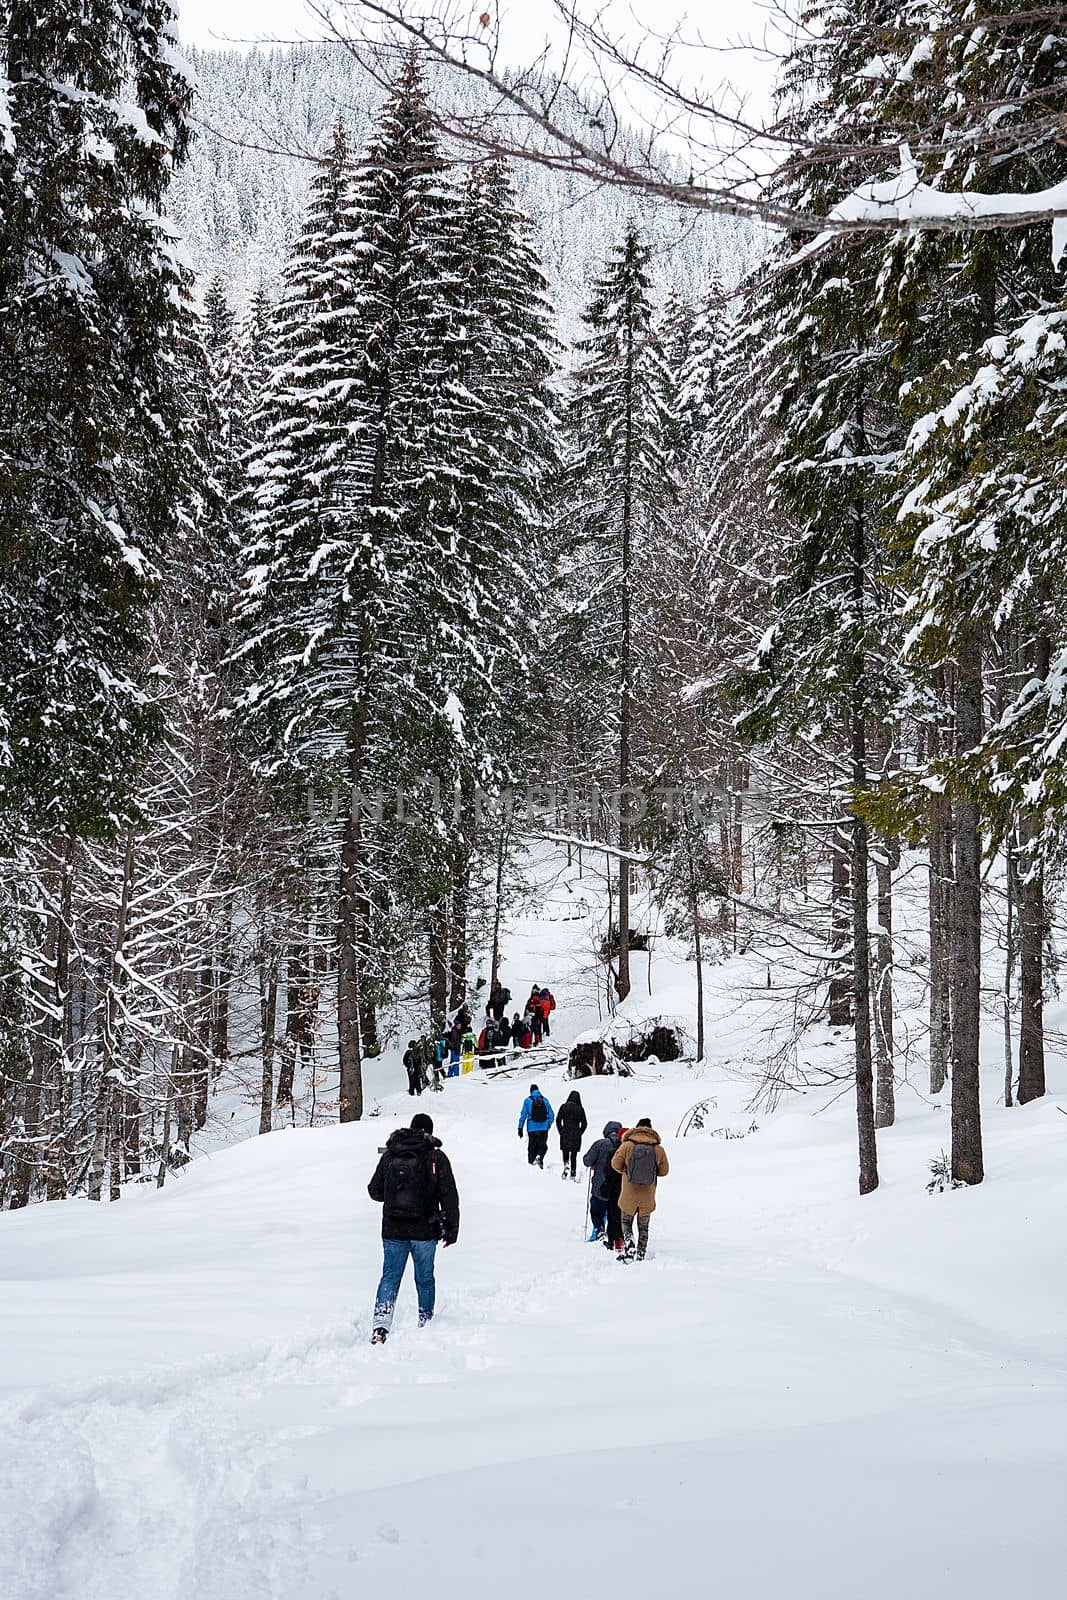 Group of trekkers on snow trail in winter forest. Outdoor adventure.